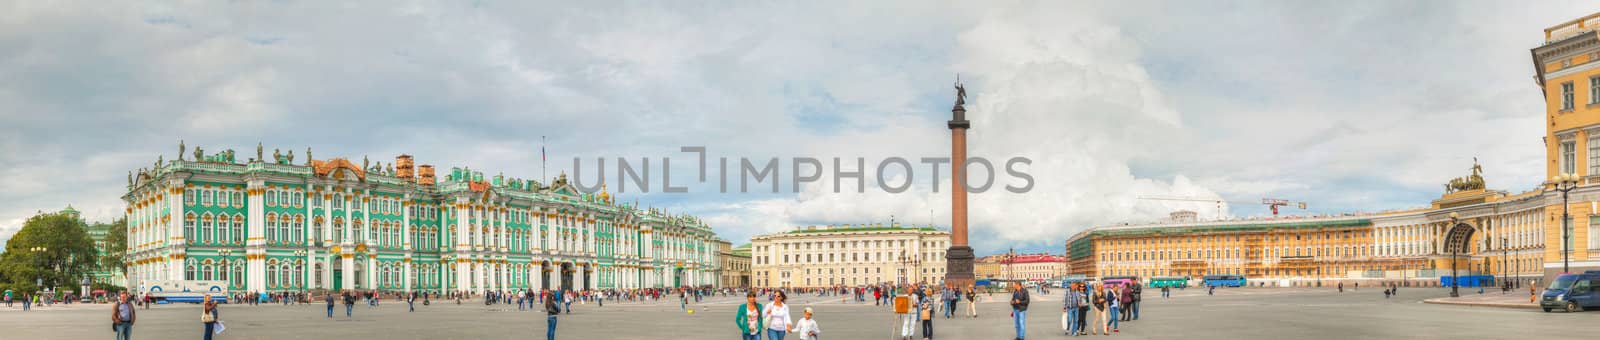 The Alexander Column at Palace (Dvortsovaya) Square in St. Peter by AndreyKr